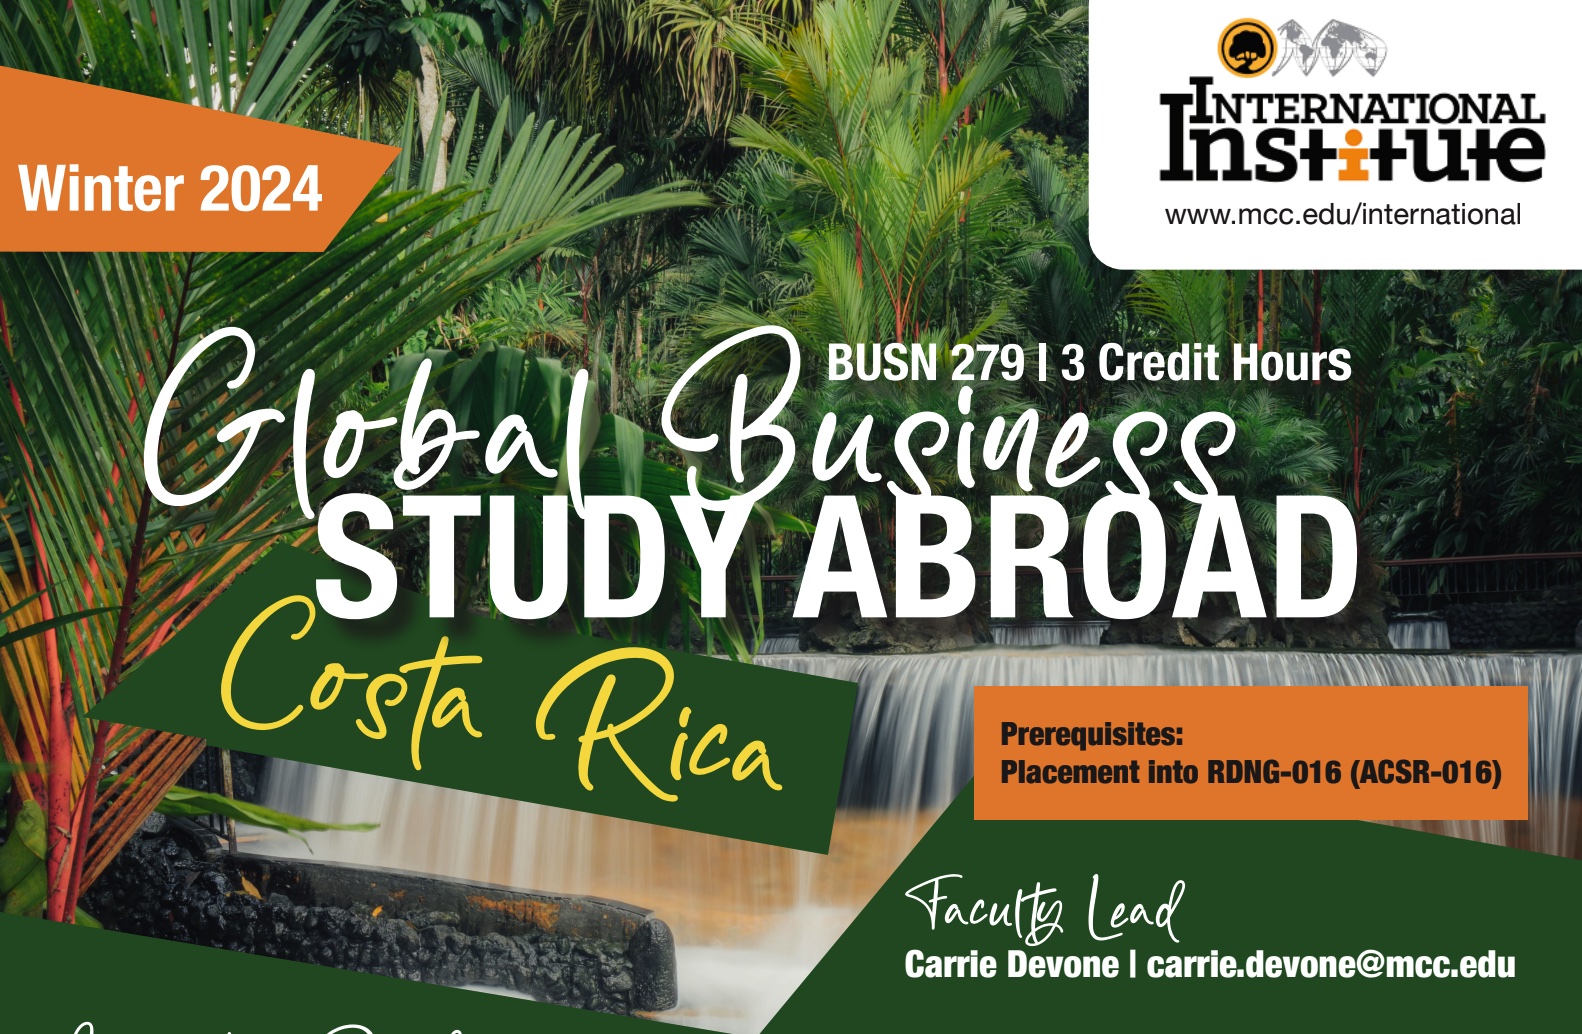 BUSN-279 Global Business Study Abroad Costa Rica